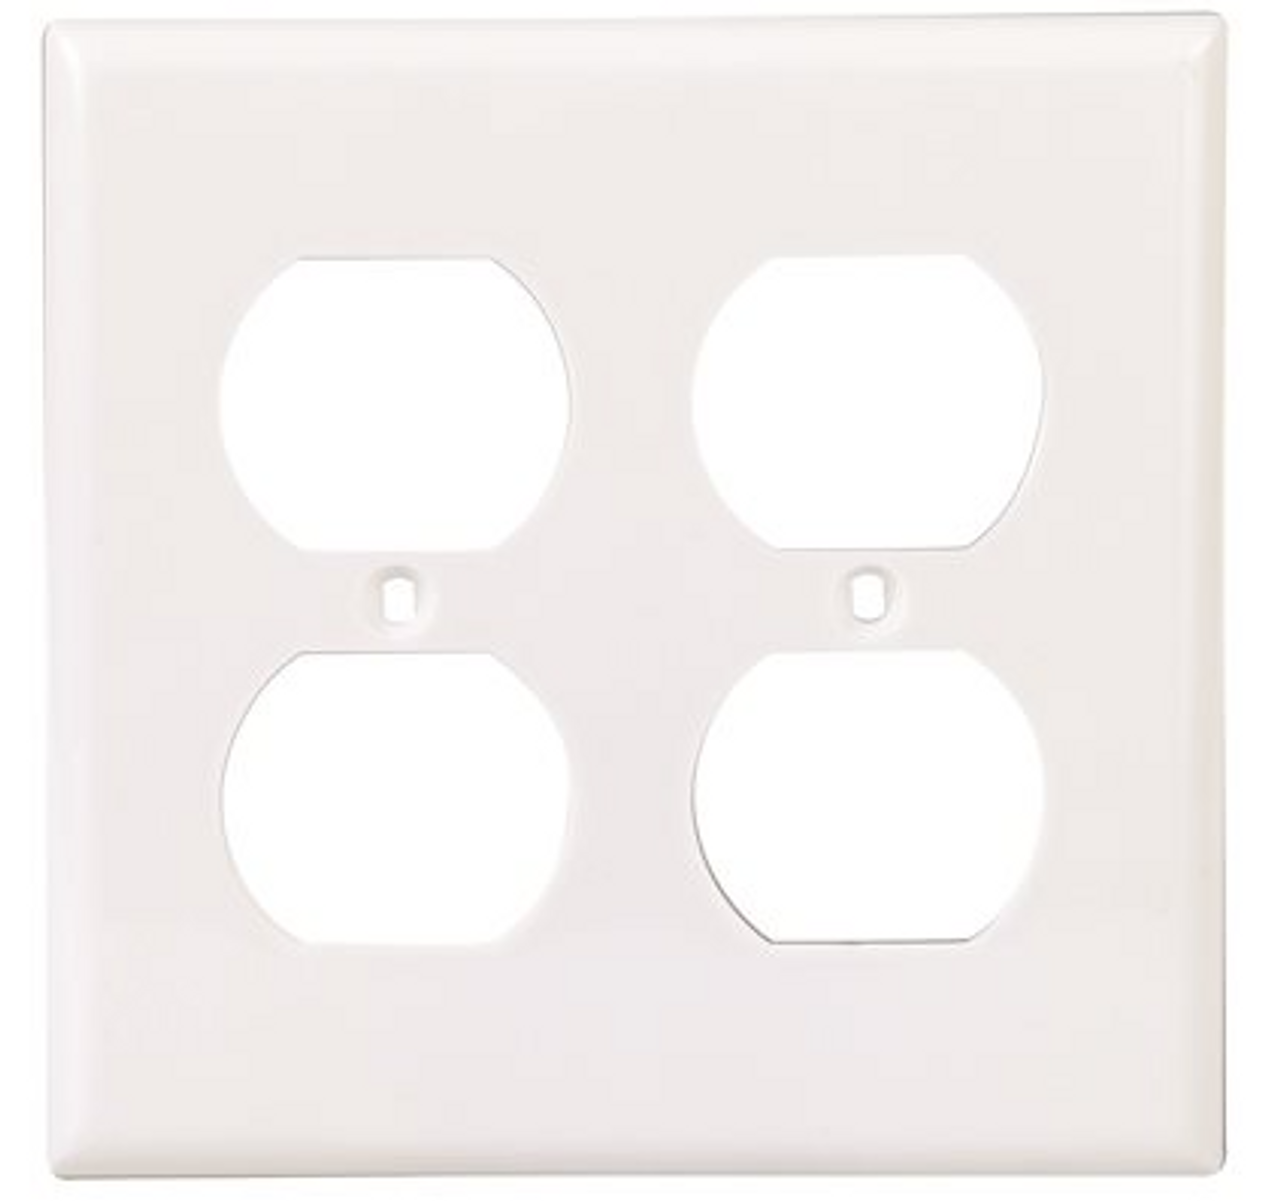 Preferred Industries White 2-Gang Duplex Outlet Wall Plate |By the Case| 